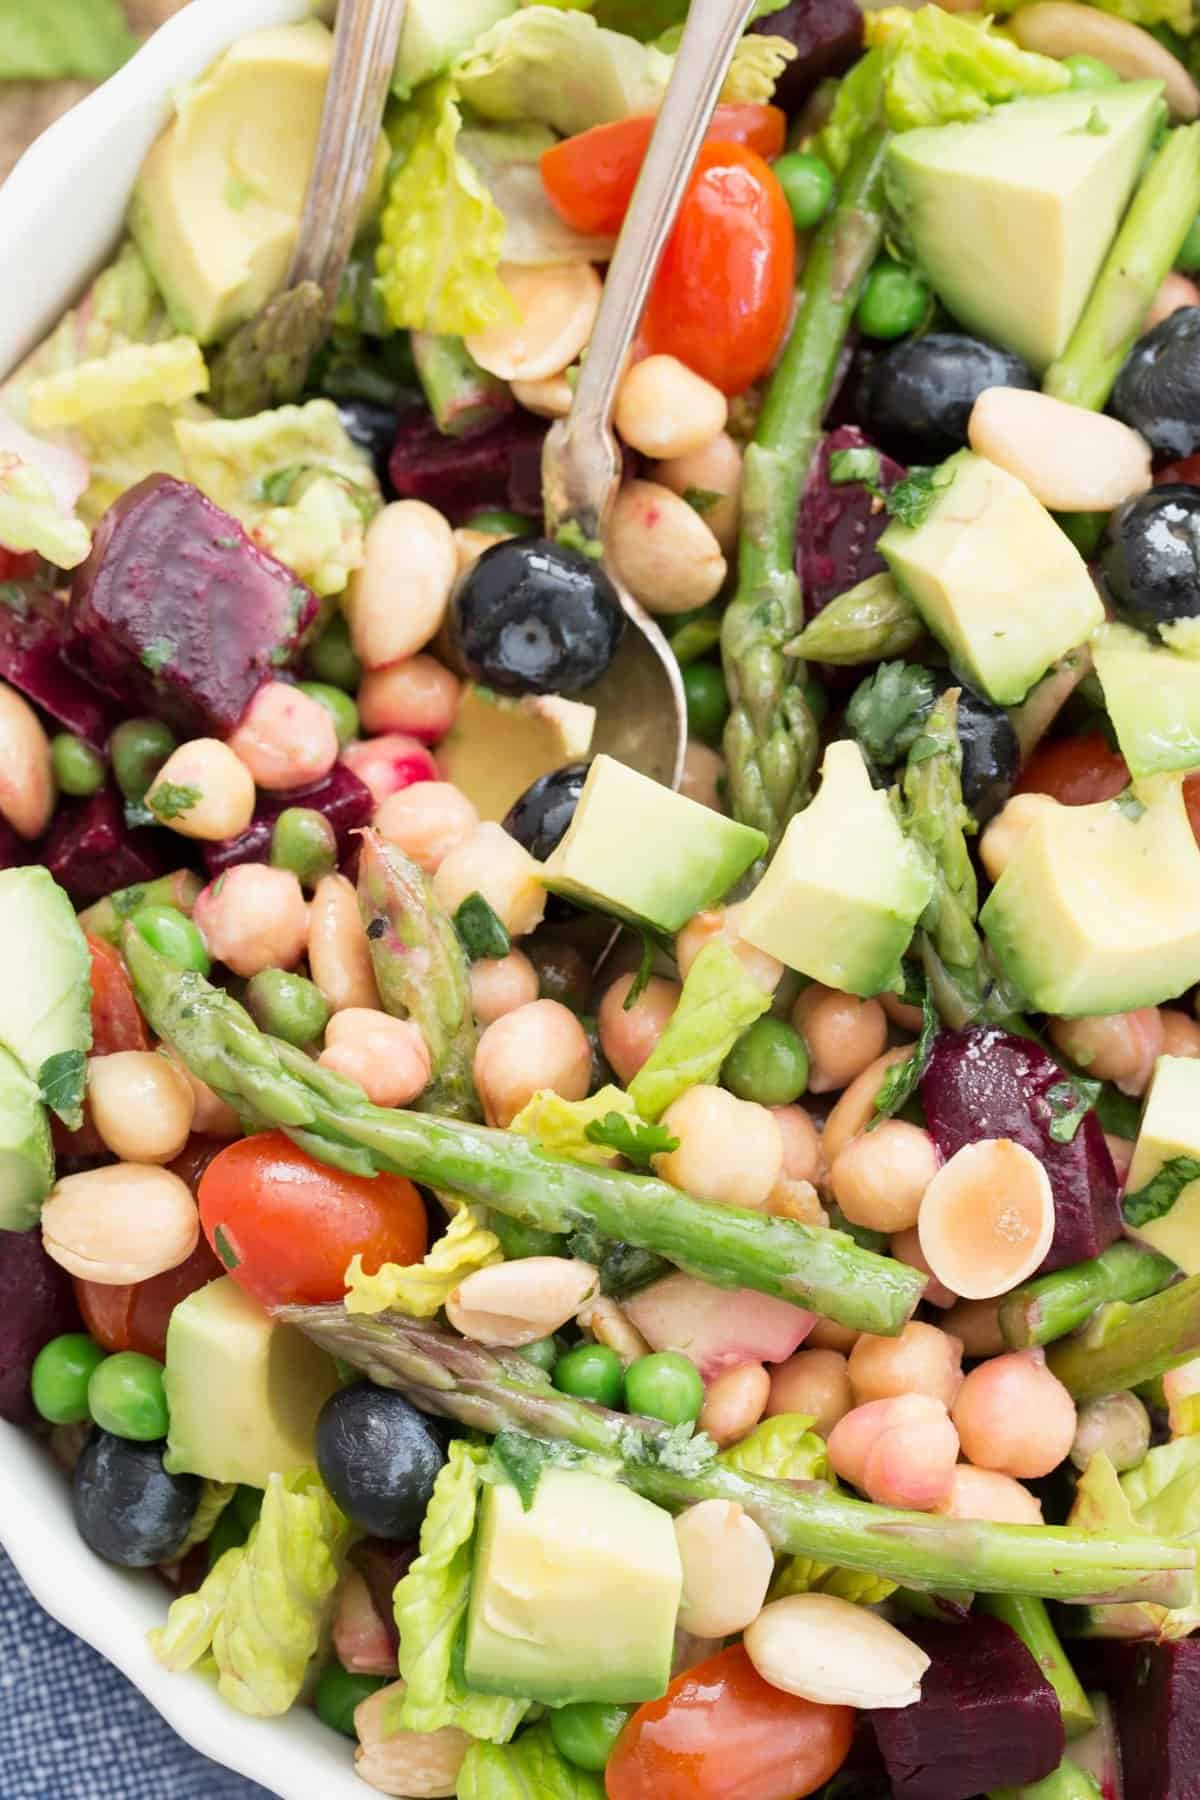 This House Salad is a delicious mix of Romaine lettuce, asparagus, beets, peas, blueberries, avocado, tomatoes, chickpeas and Marcona almonds